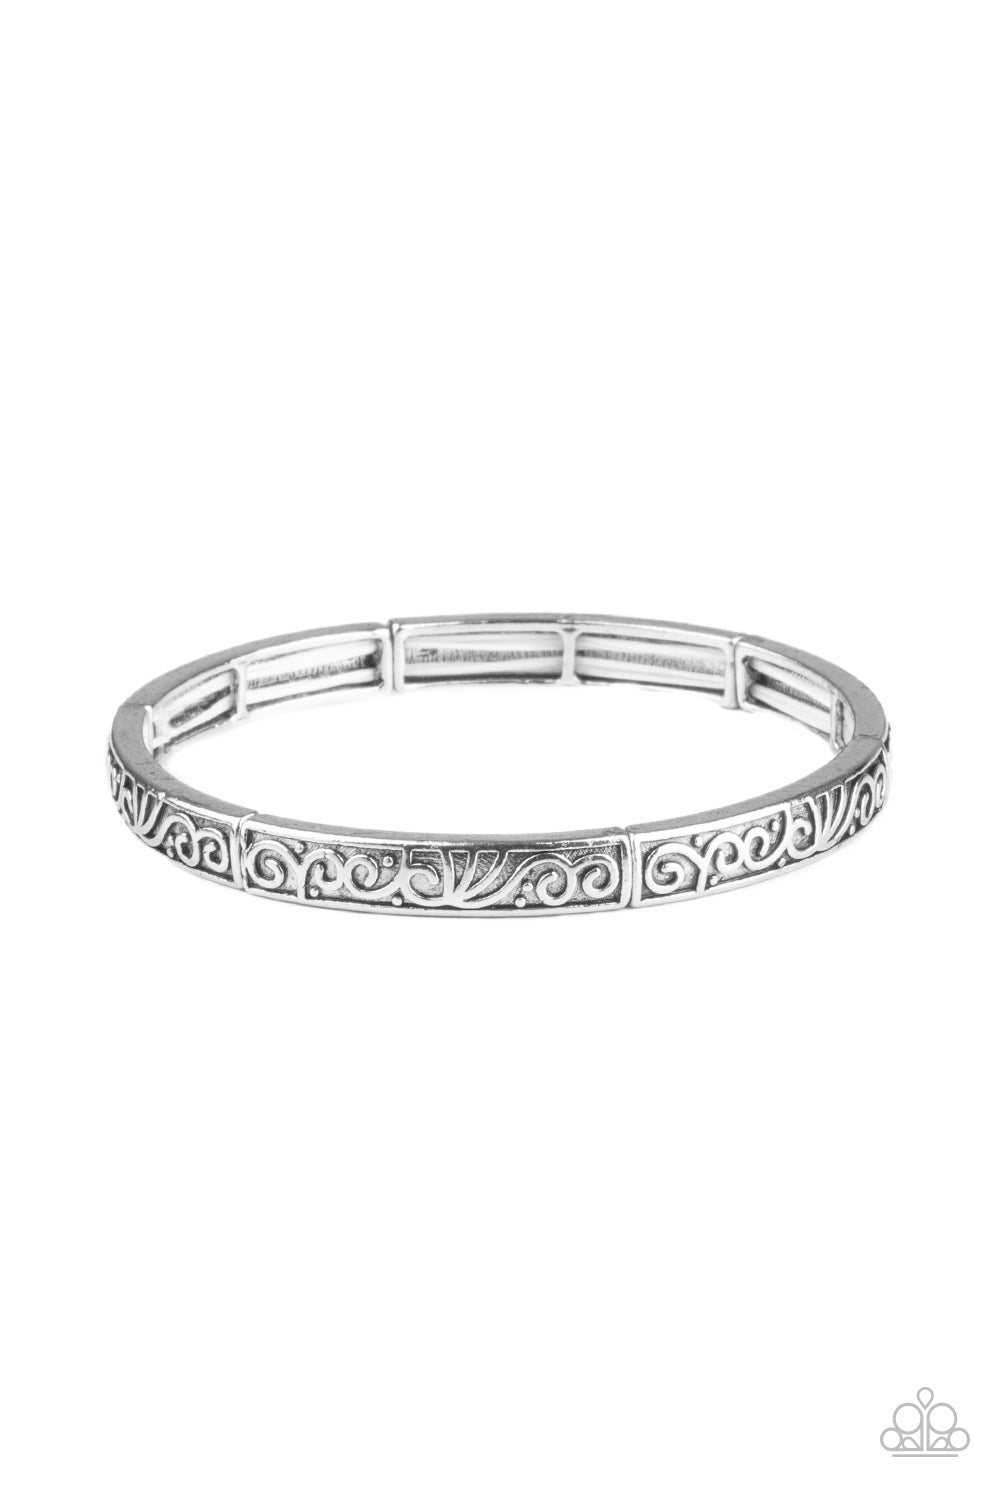 Paparazzi Precisely Petite - Silver Bracelet - A Finishing Touch Jewelry